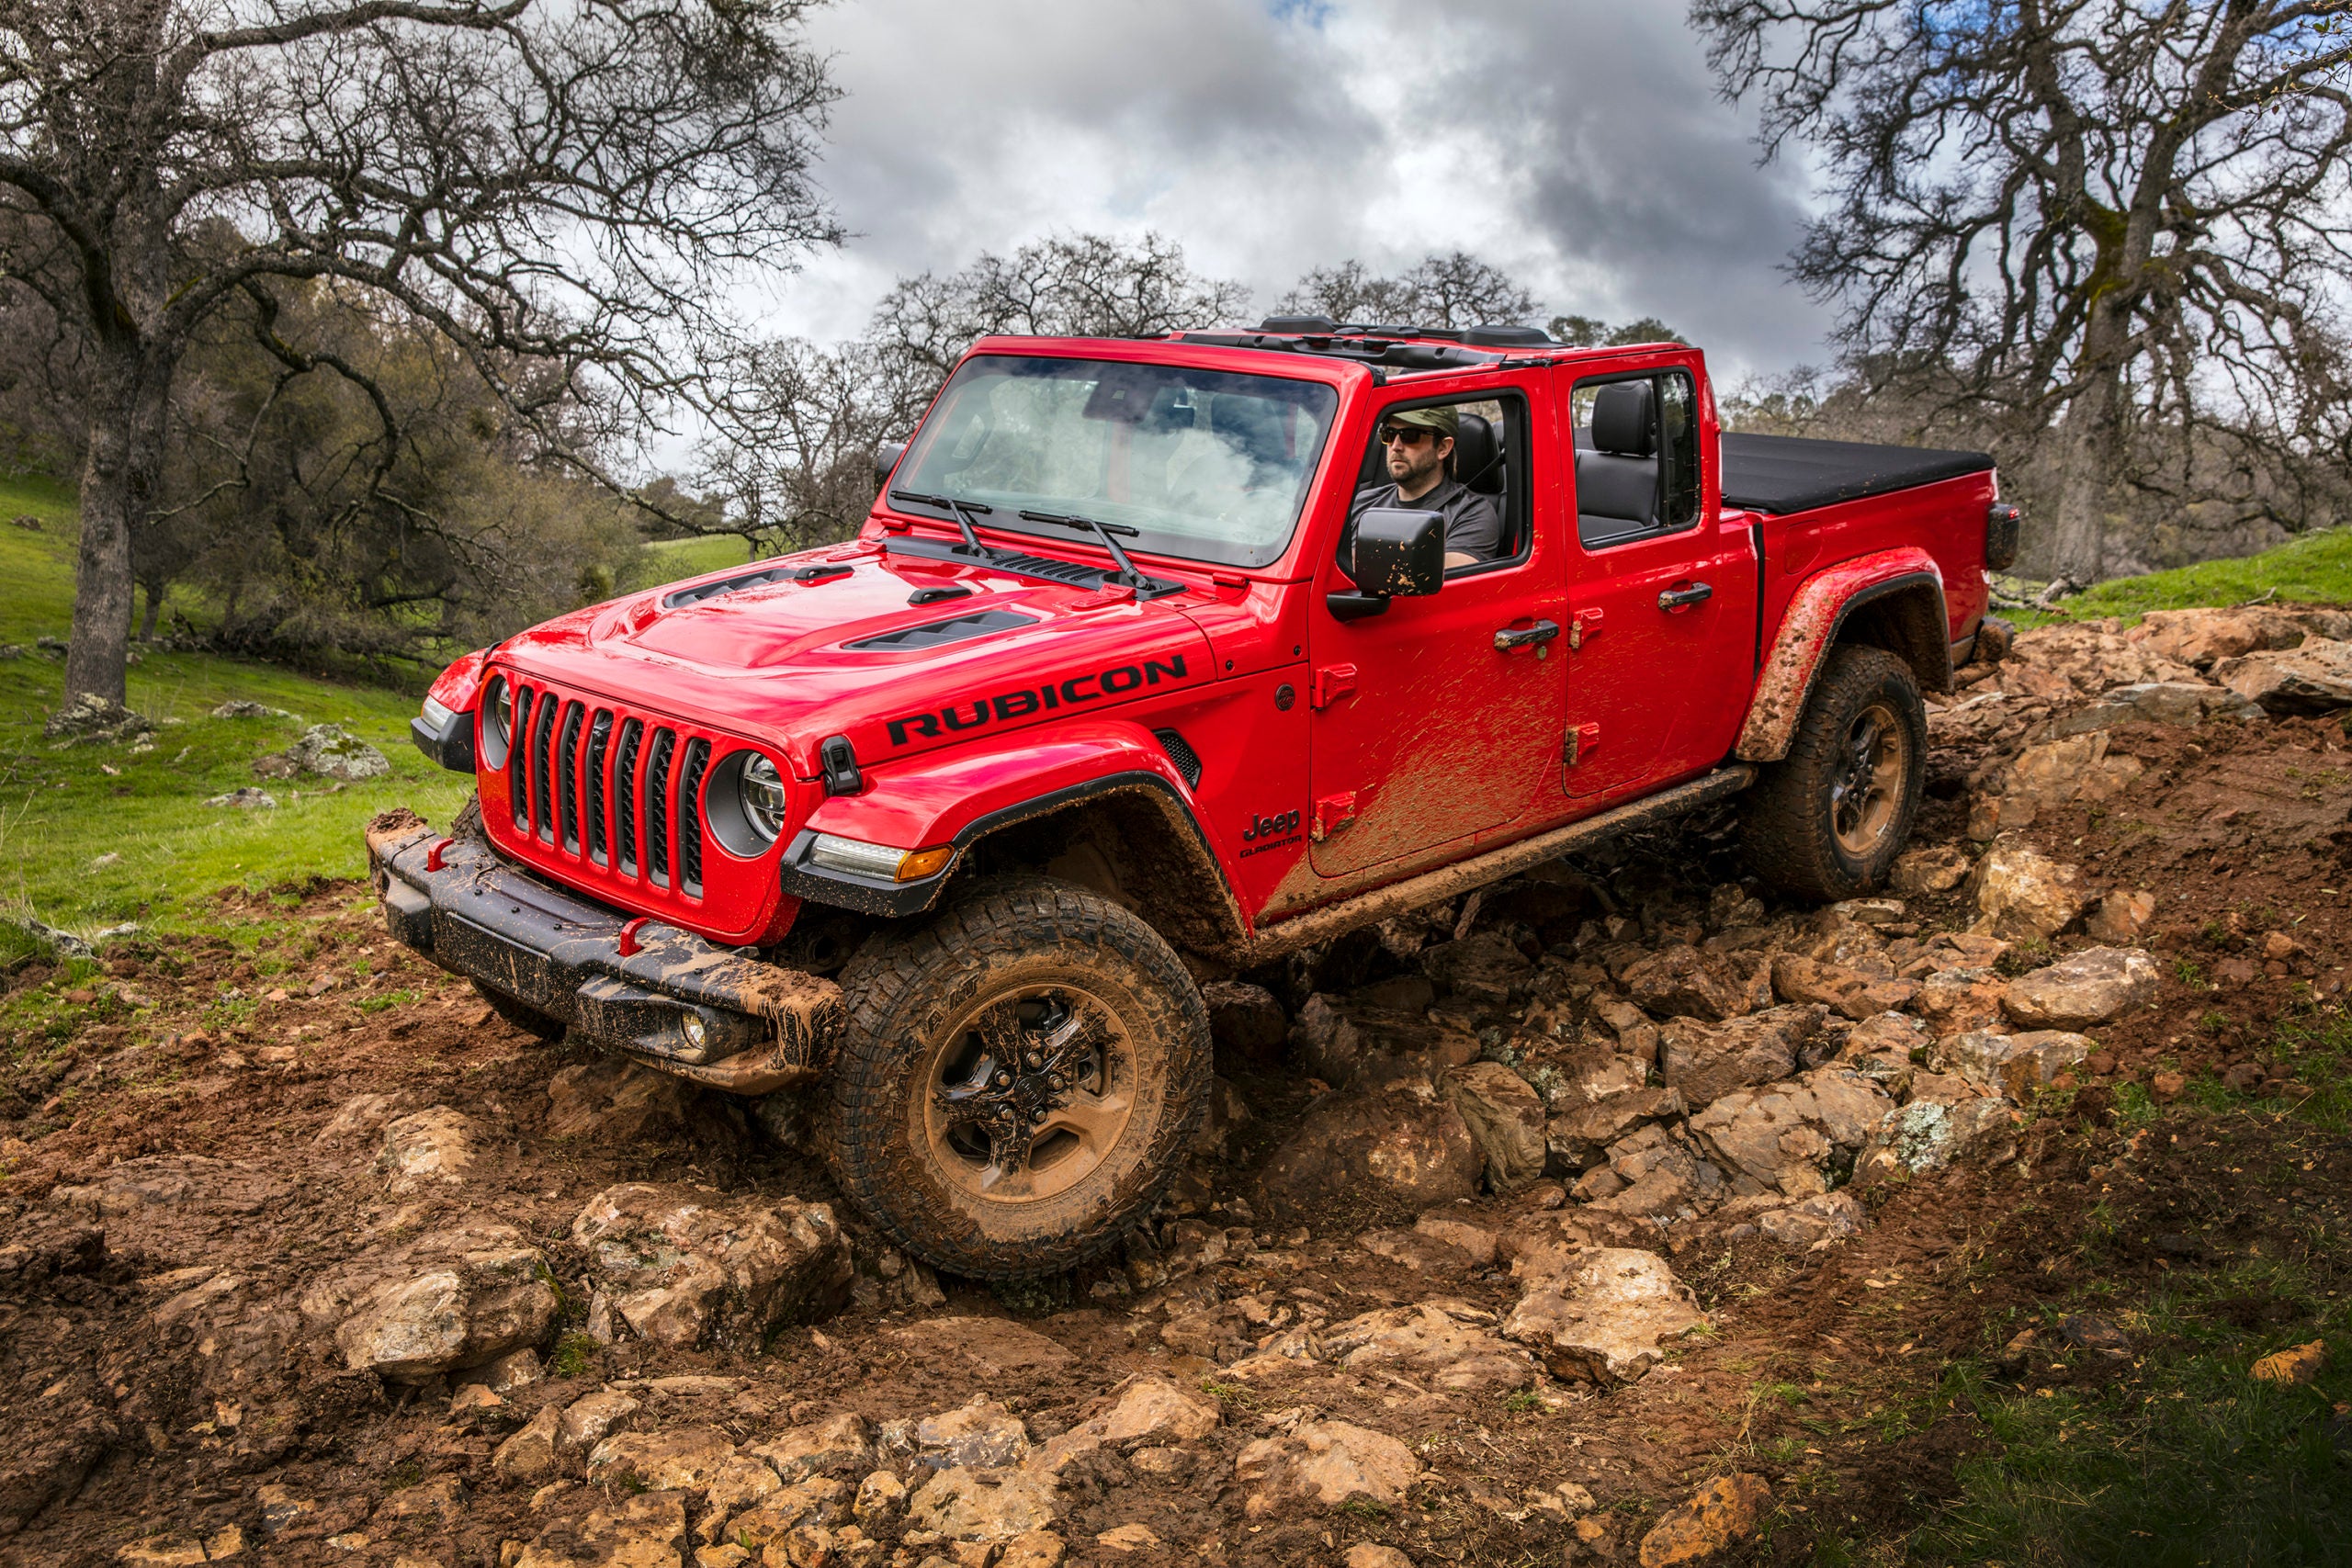 The all-new 2020 Jeep Gladiator has some serious off-road chops